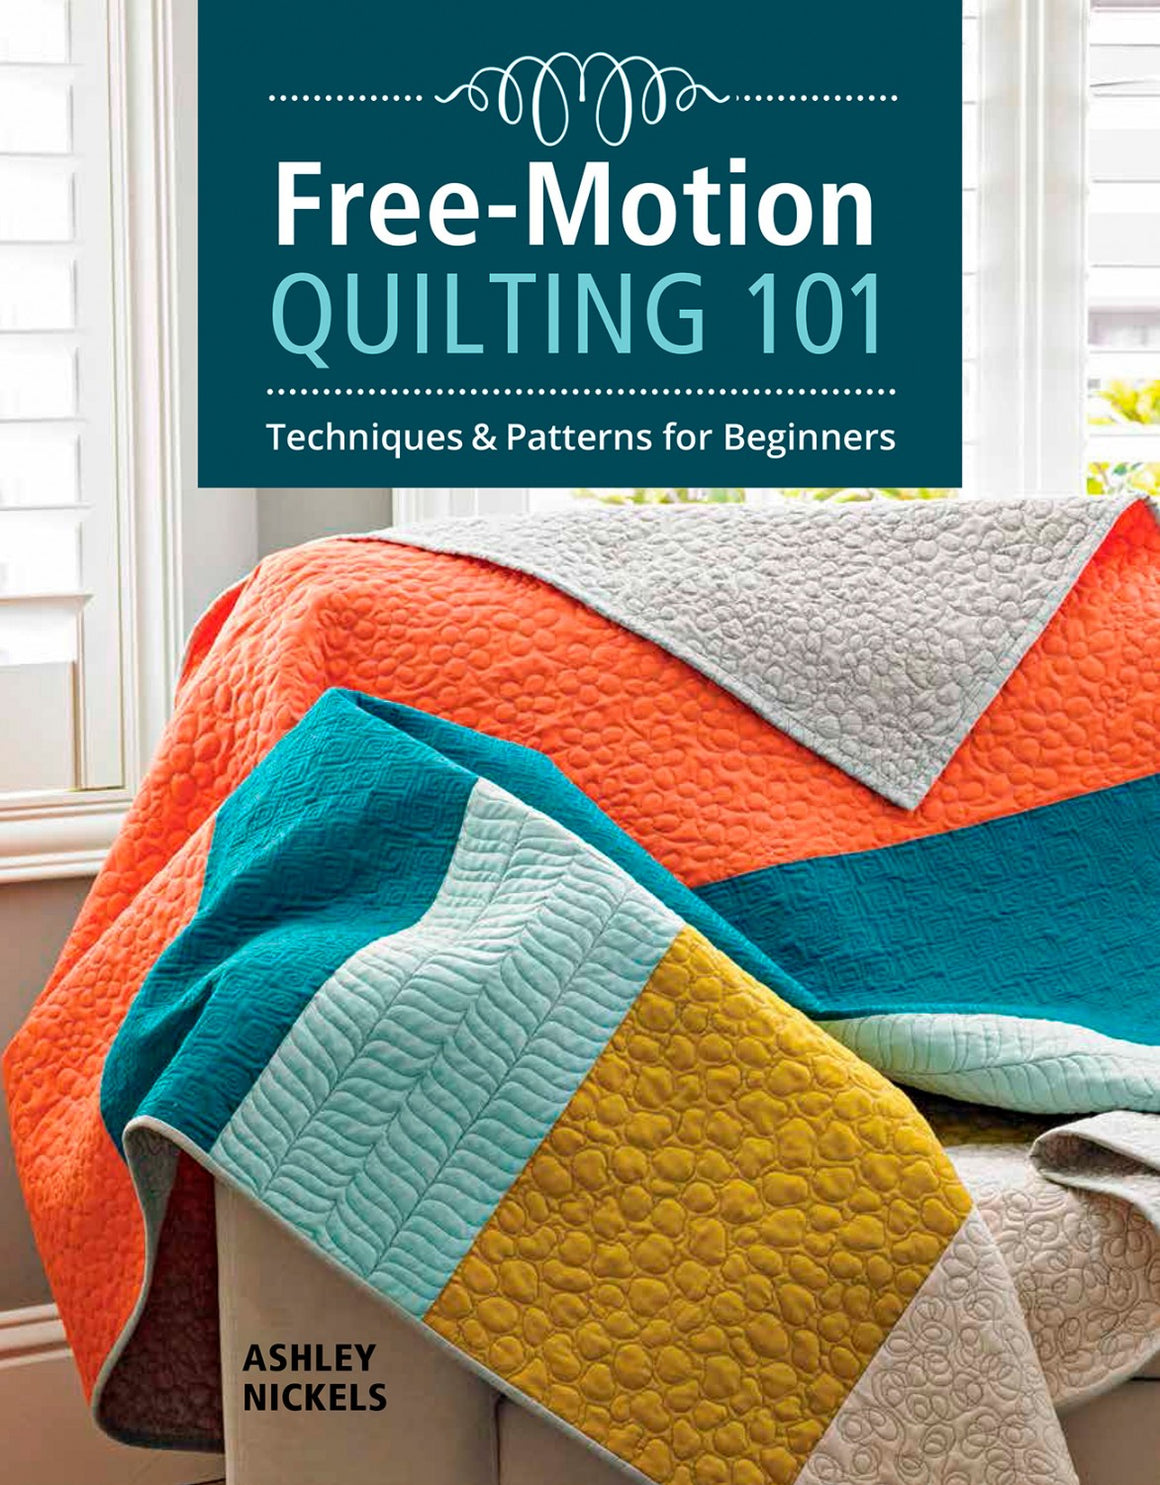 FreeMotion Quilting 101 Quilting Patterns Quilting Books Patterns